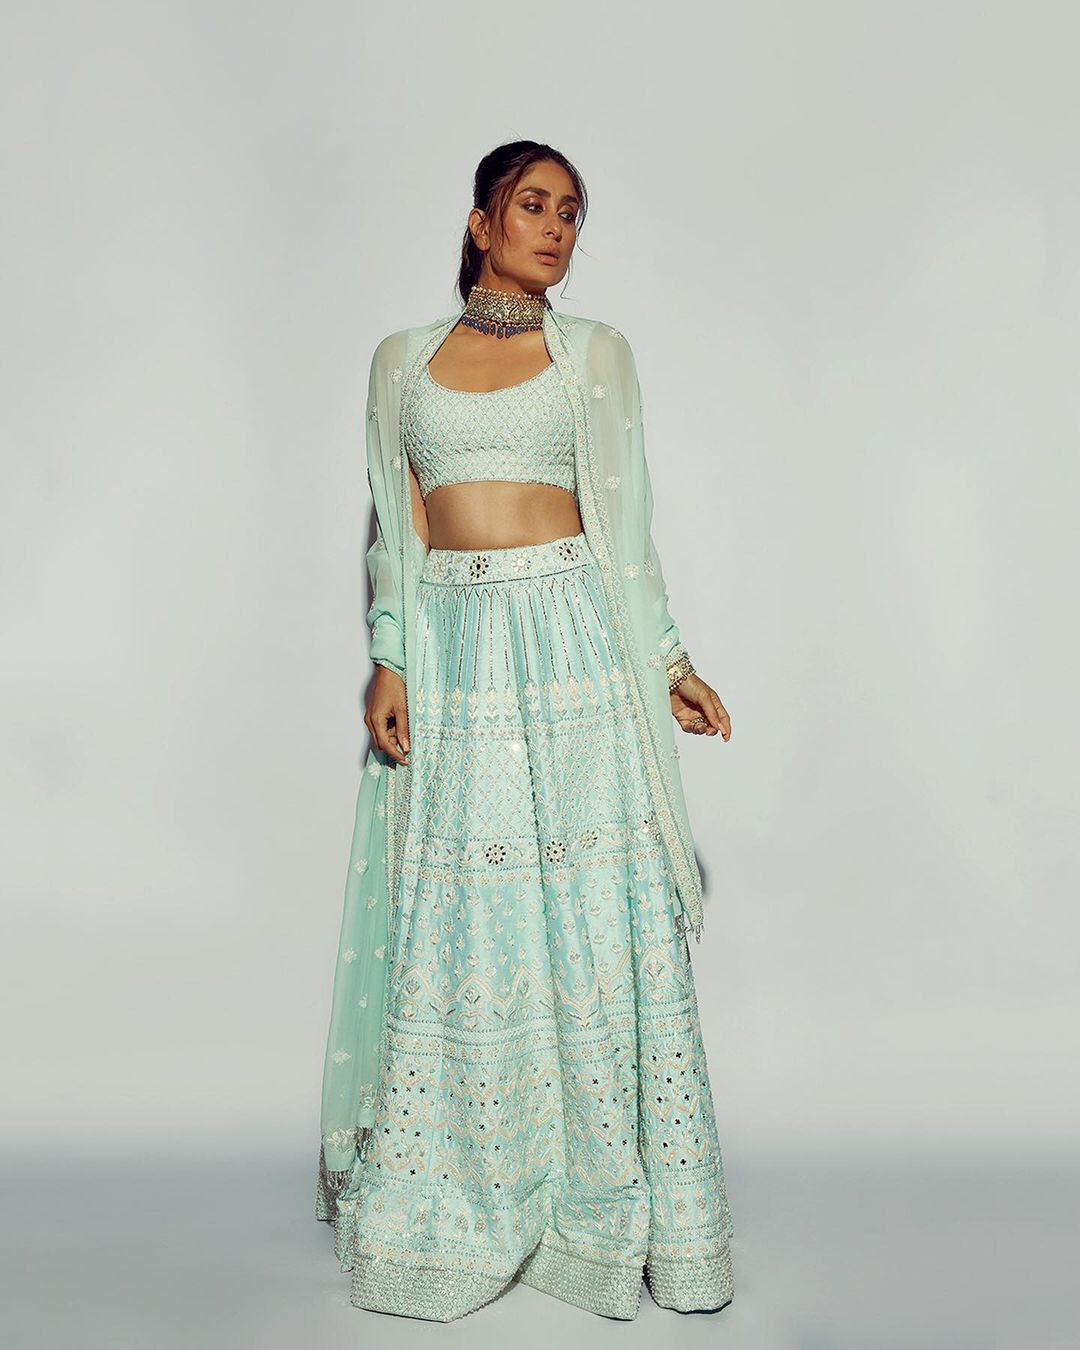 5 lehengas from Kareena Kapoor Khan's closet that will instantly elevate  your wedding wardrobe - See Photos | VOGUE India